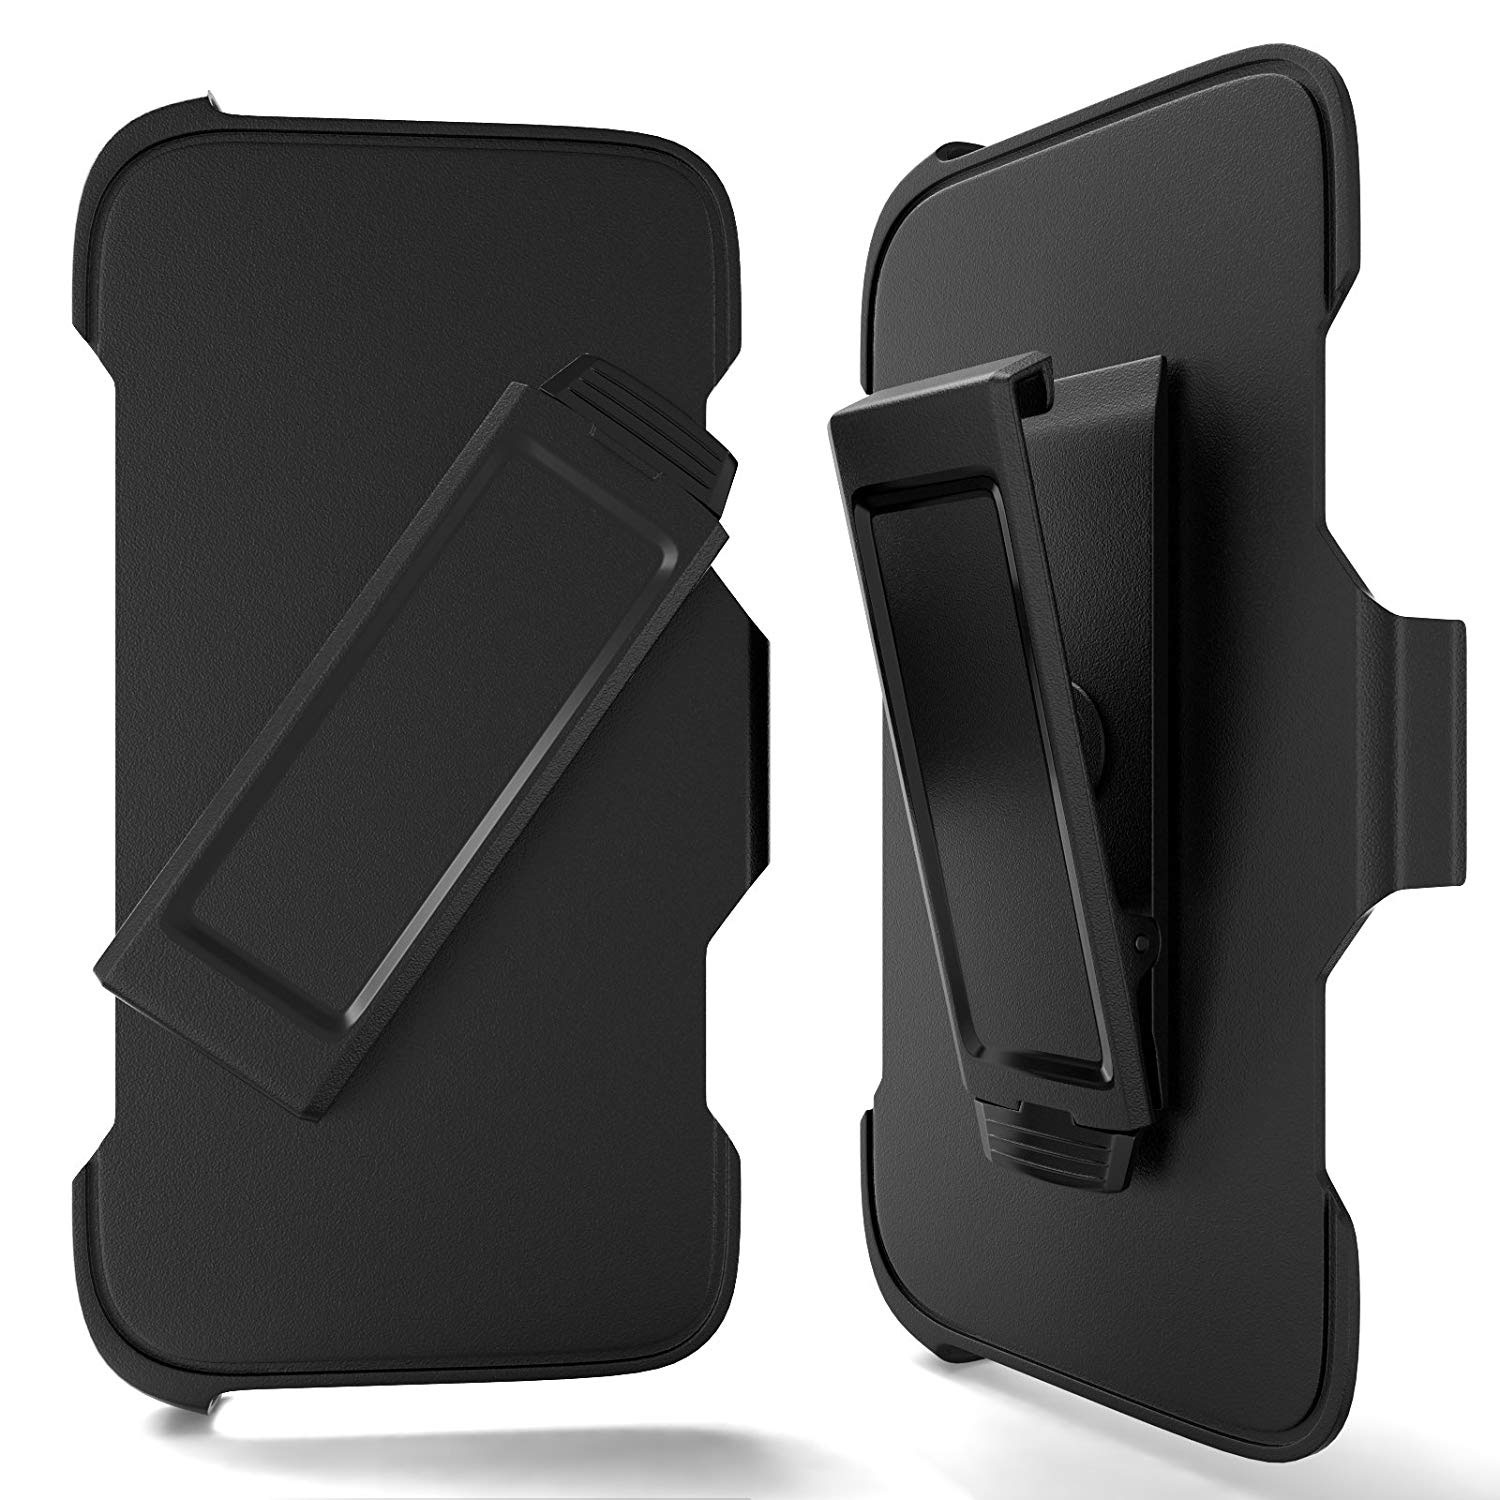 iPHONE 11 Pro (5.8in) Armor Robot Clip Only (Black)